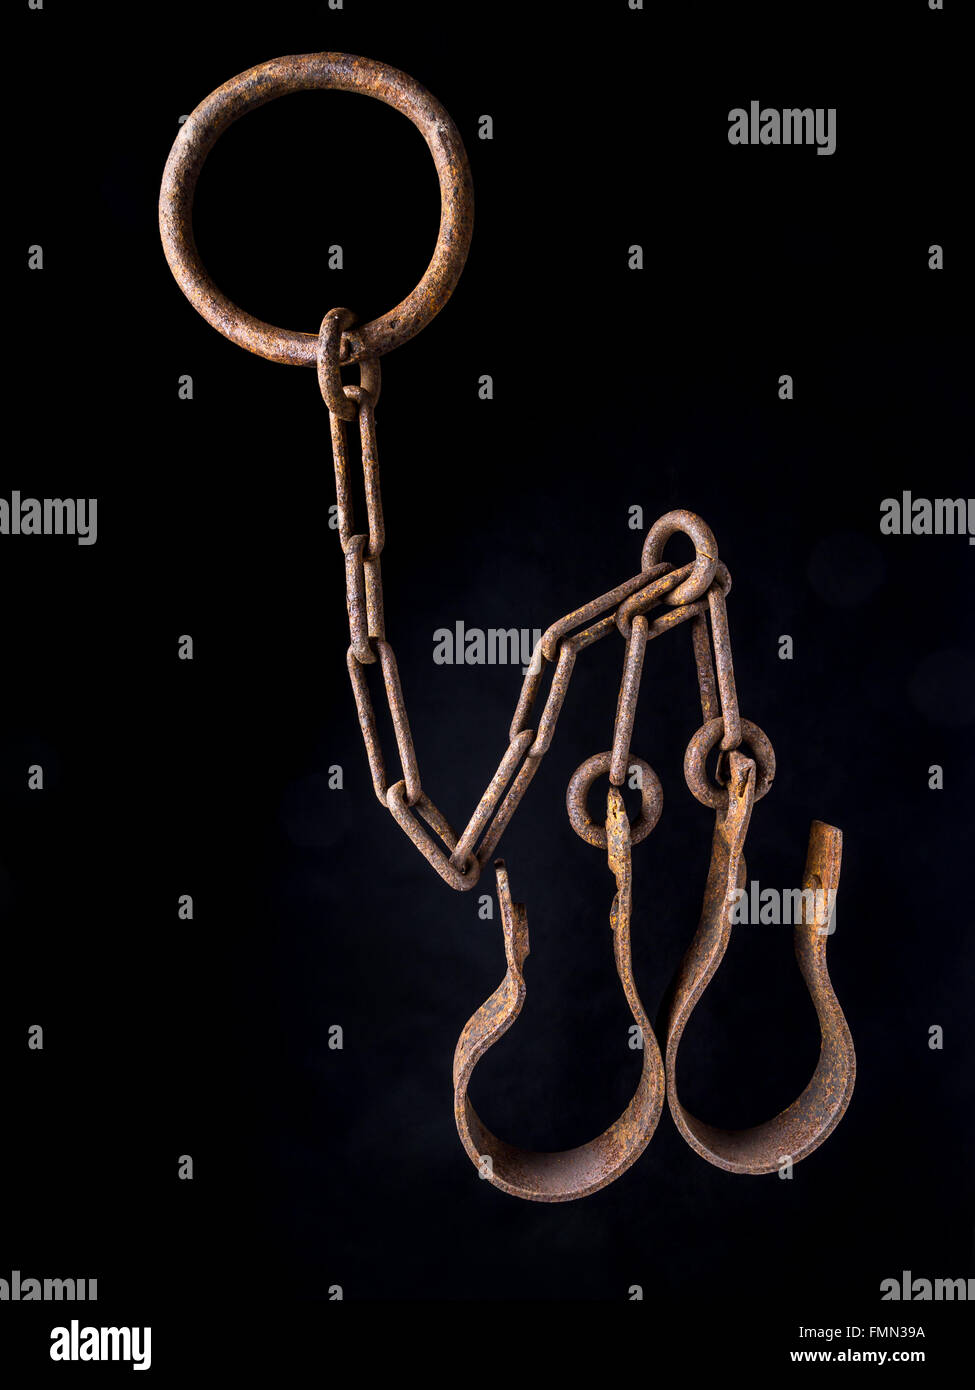 Old rusty shackles on black background Stock Photo